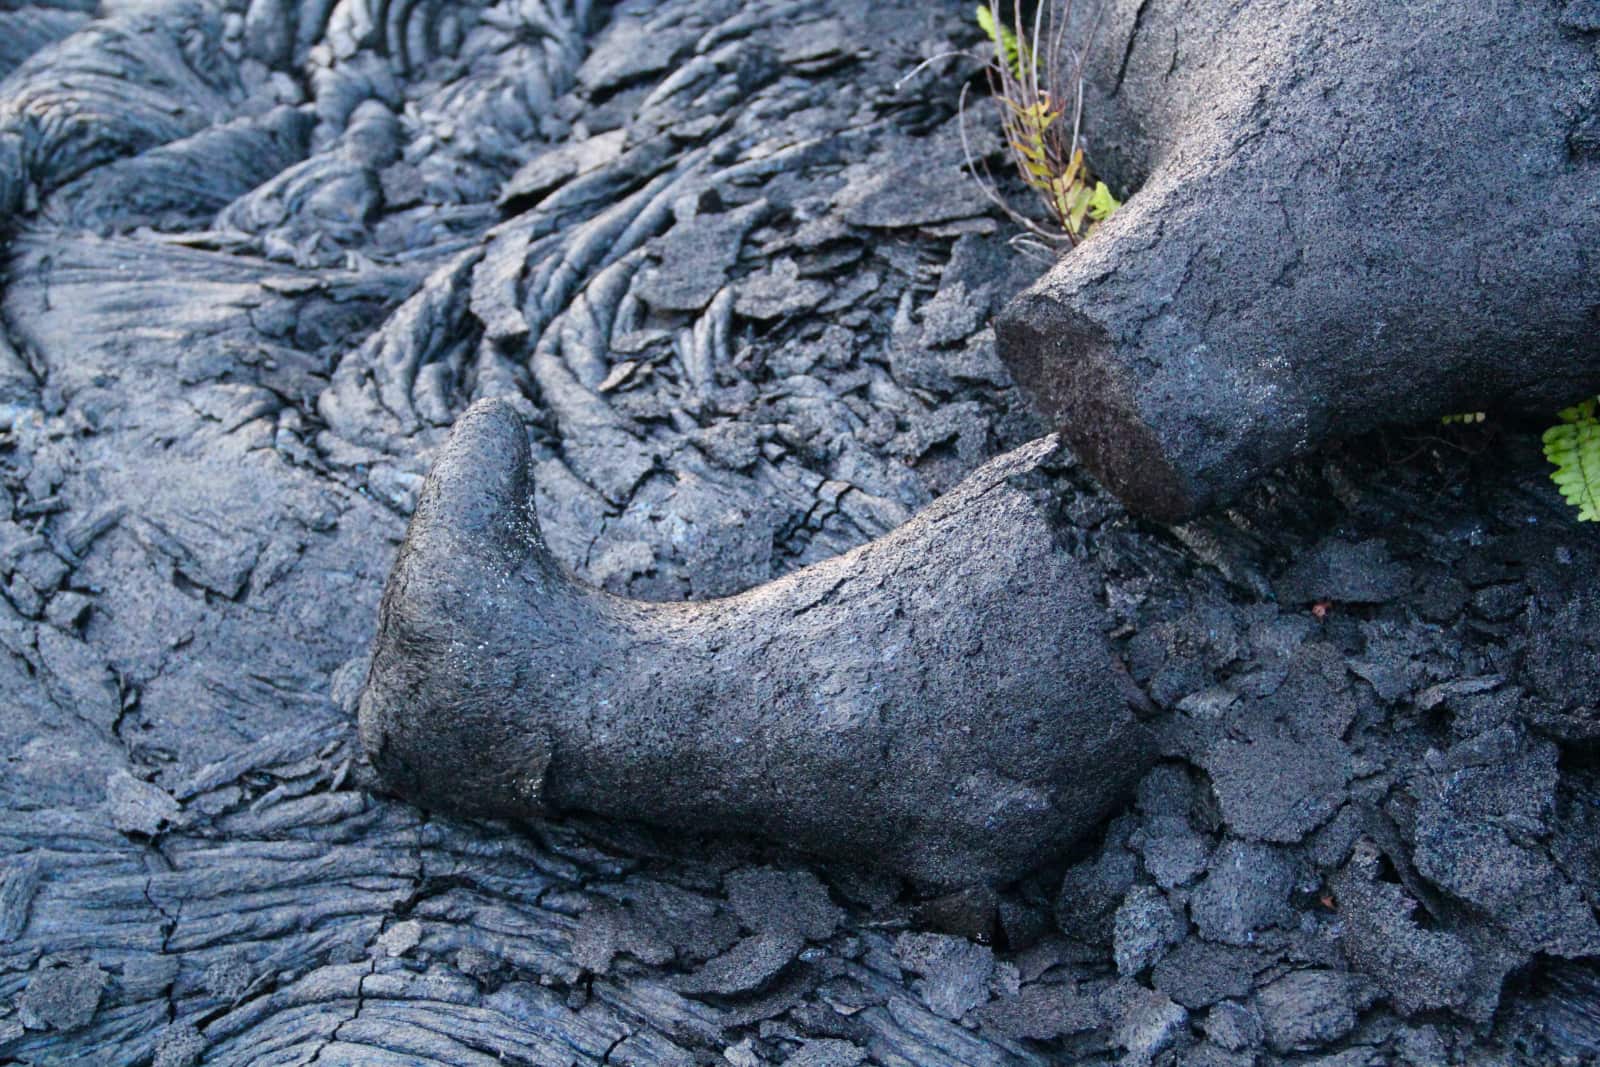 Dried lava looking like a boot